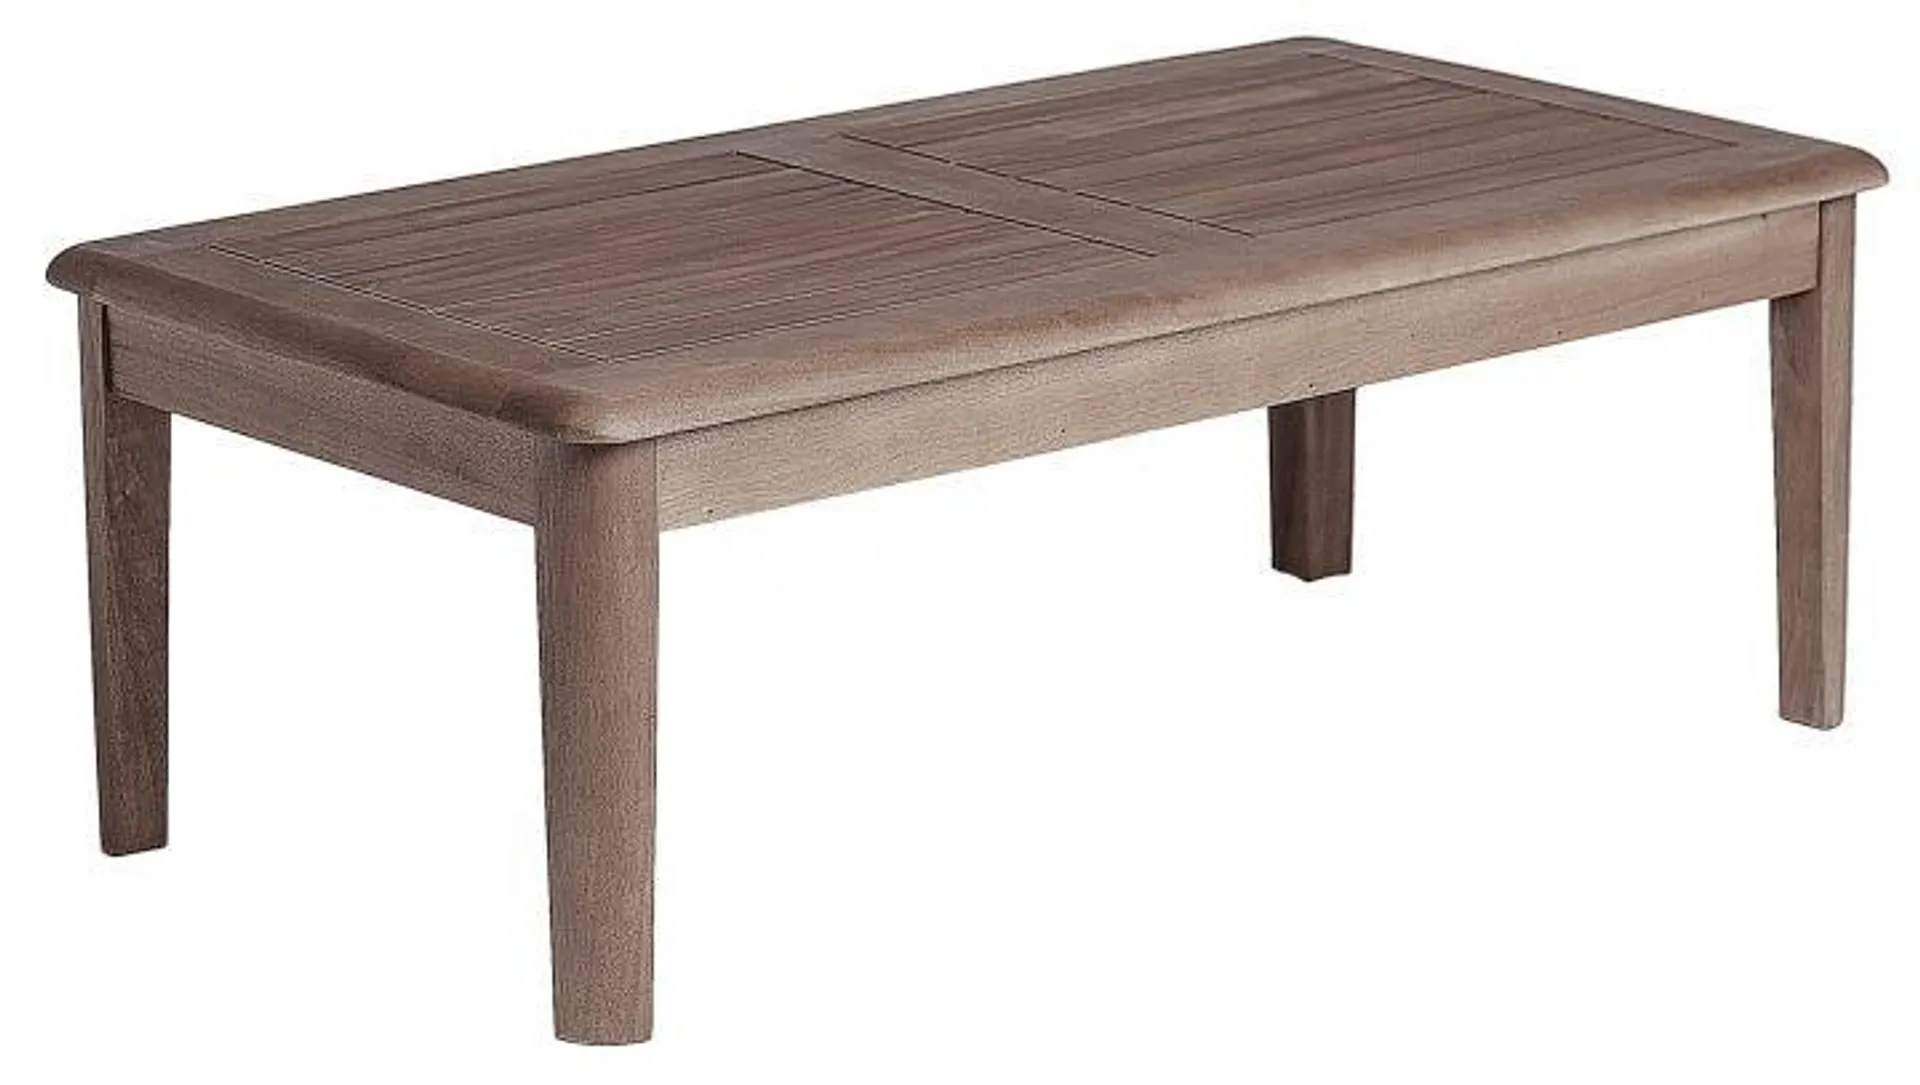 Alexander Rose Sherwood Broadfield Coffee Table 1.2M x 0.65M LOCAL DELIVERY ONLY 20 MILES FROM SG12 9RP